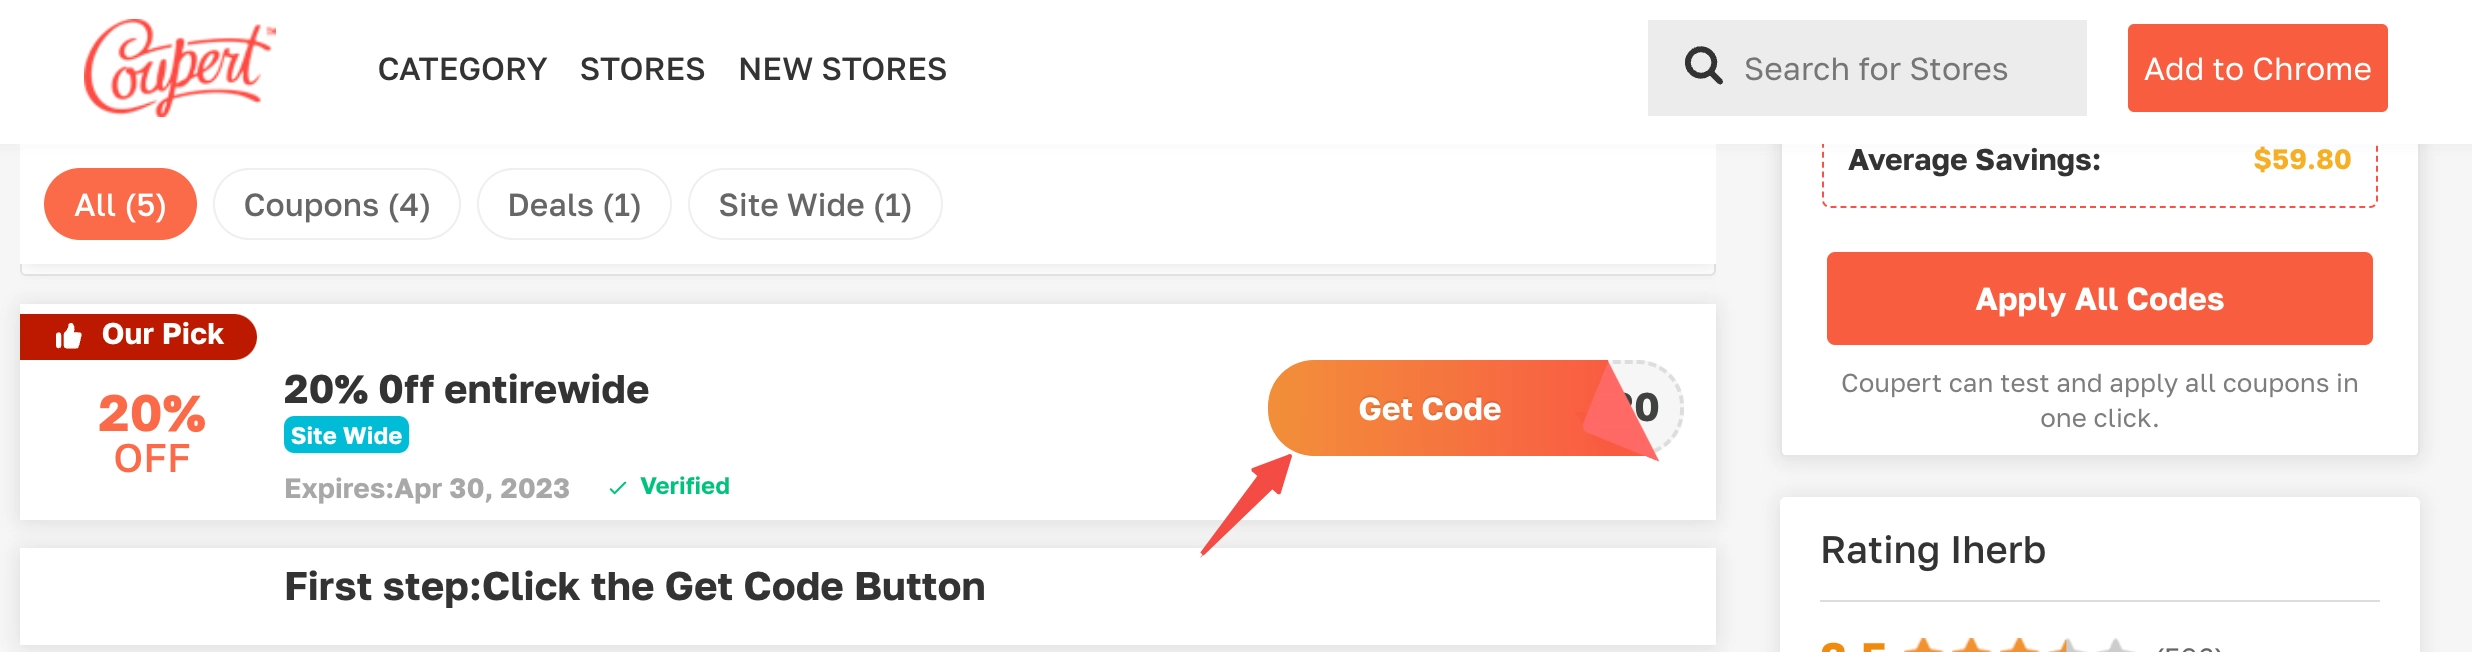 Step 1:  Select Biologi Discount Code and click on "Get Code" or "Get Deal".